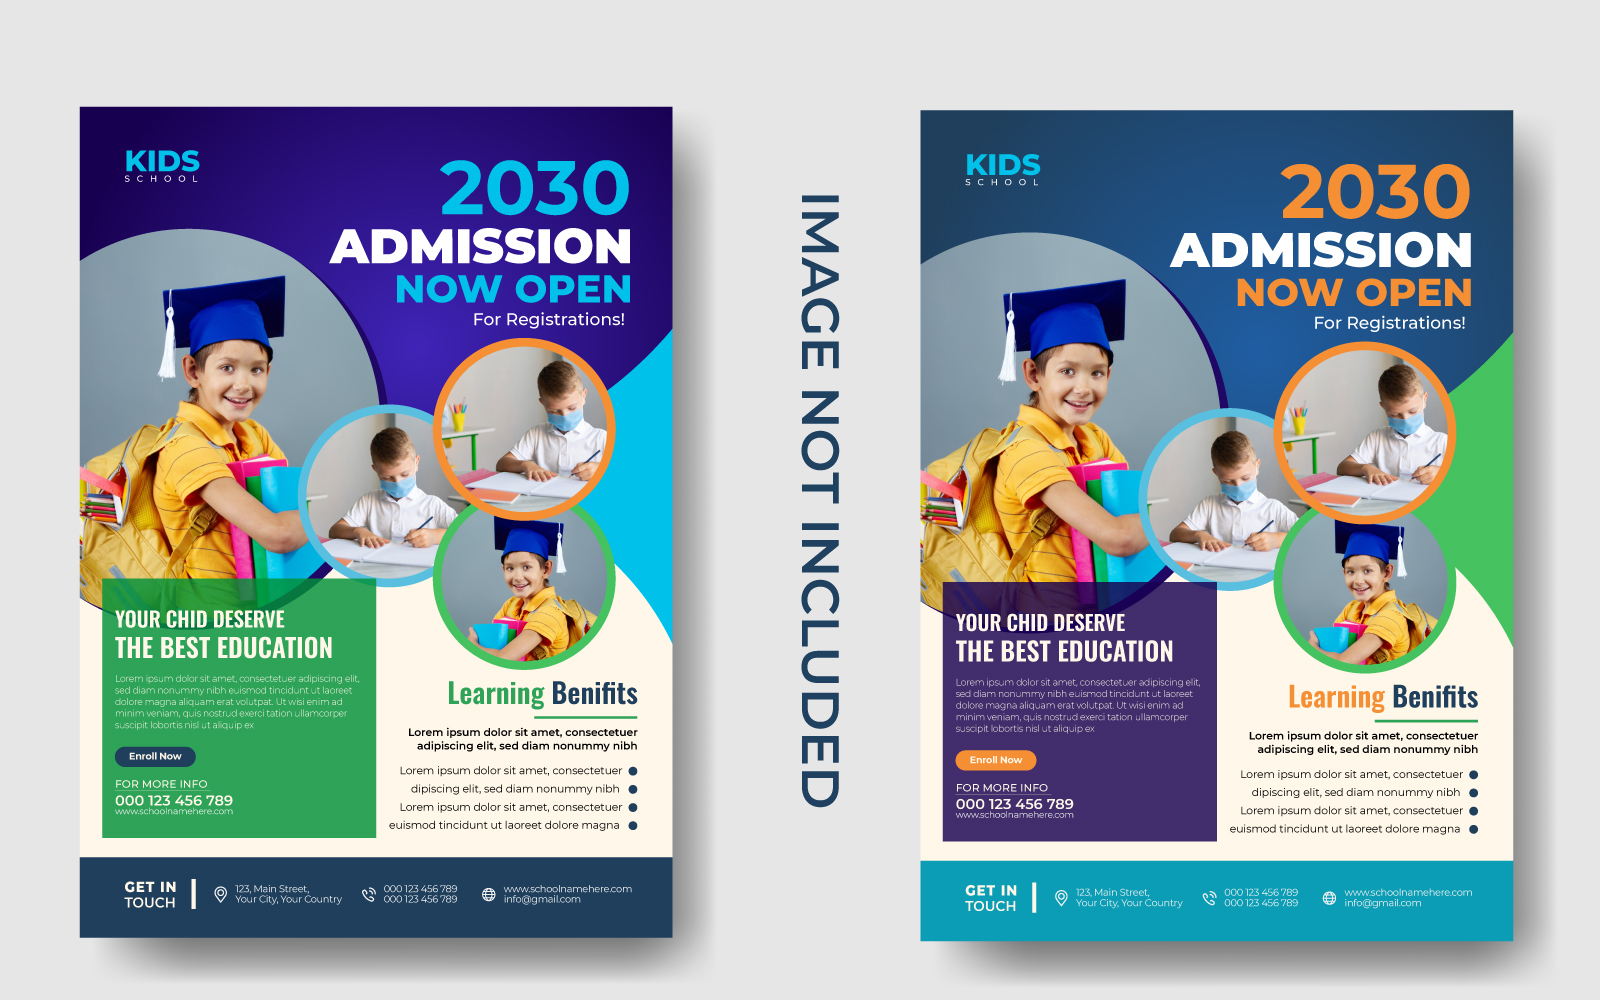 School Admission Flyer Or Poster. Back To School A4 Paper Size Design